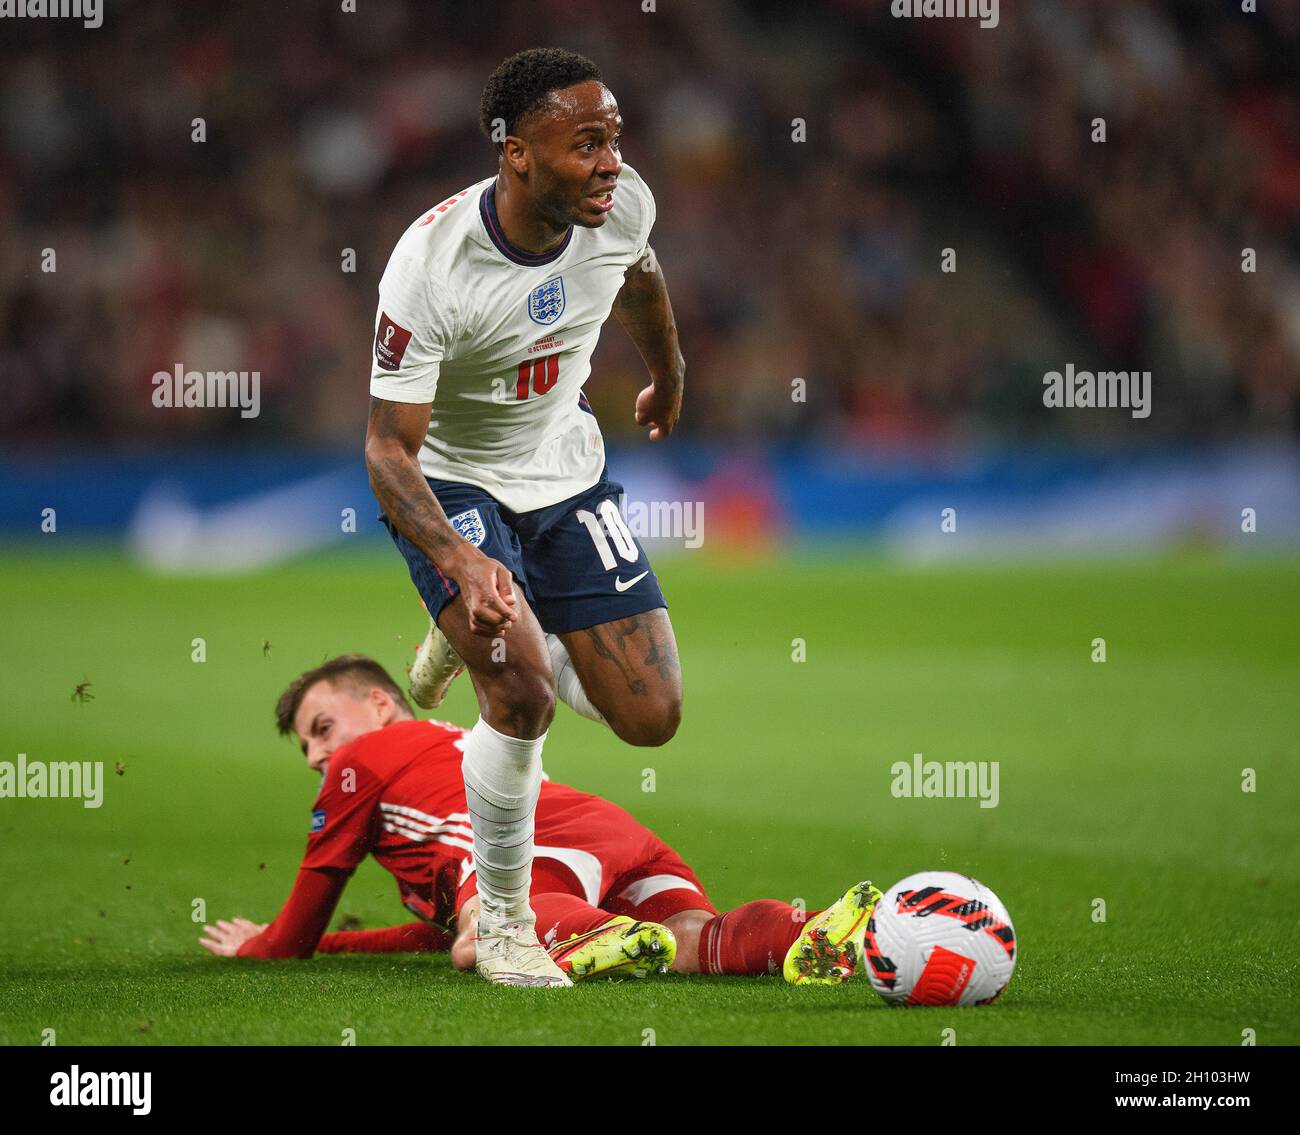 England v Hungary - FIFA World Cup 2022 - Wembley Stadium Englands Raheem Sterling during the World Cup Qualifier at Wembley